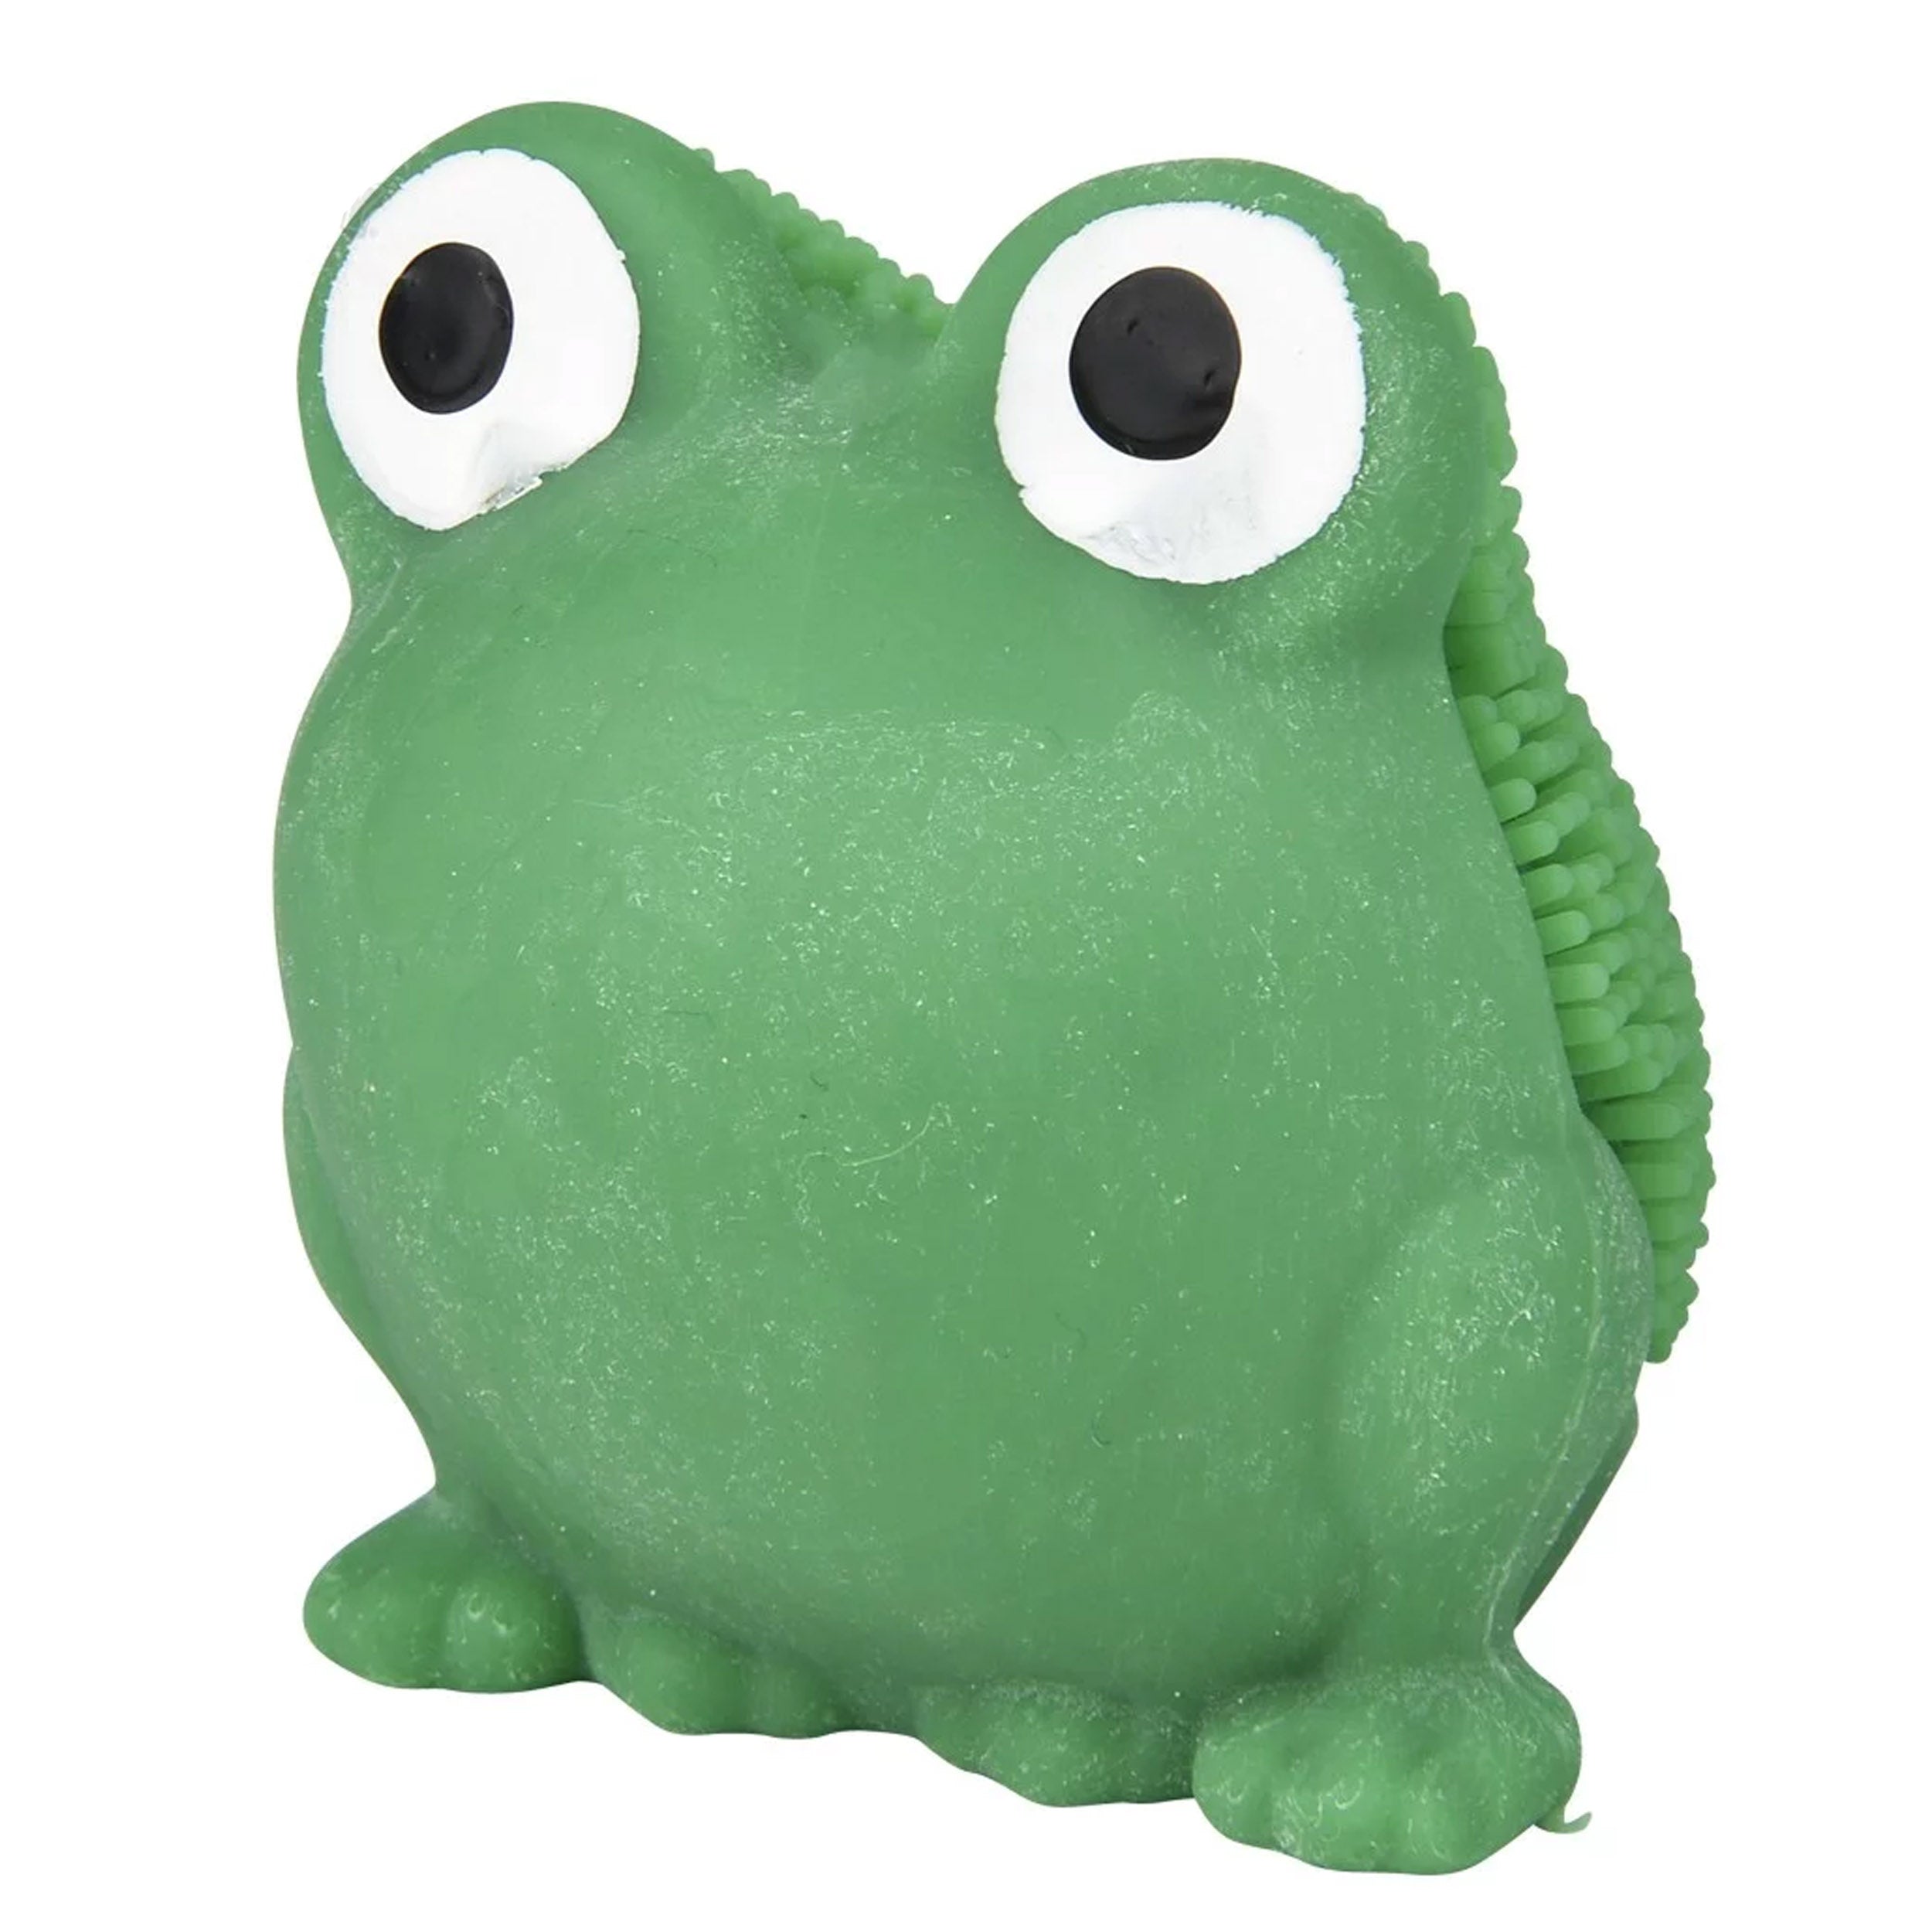 Squishy Spike Frog: Mini Puffer Frog with Soft Rubber Spikes